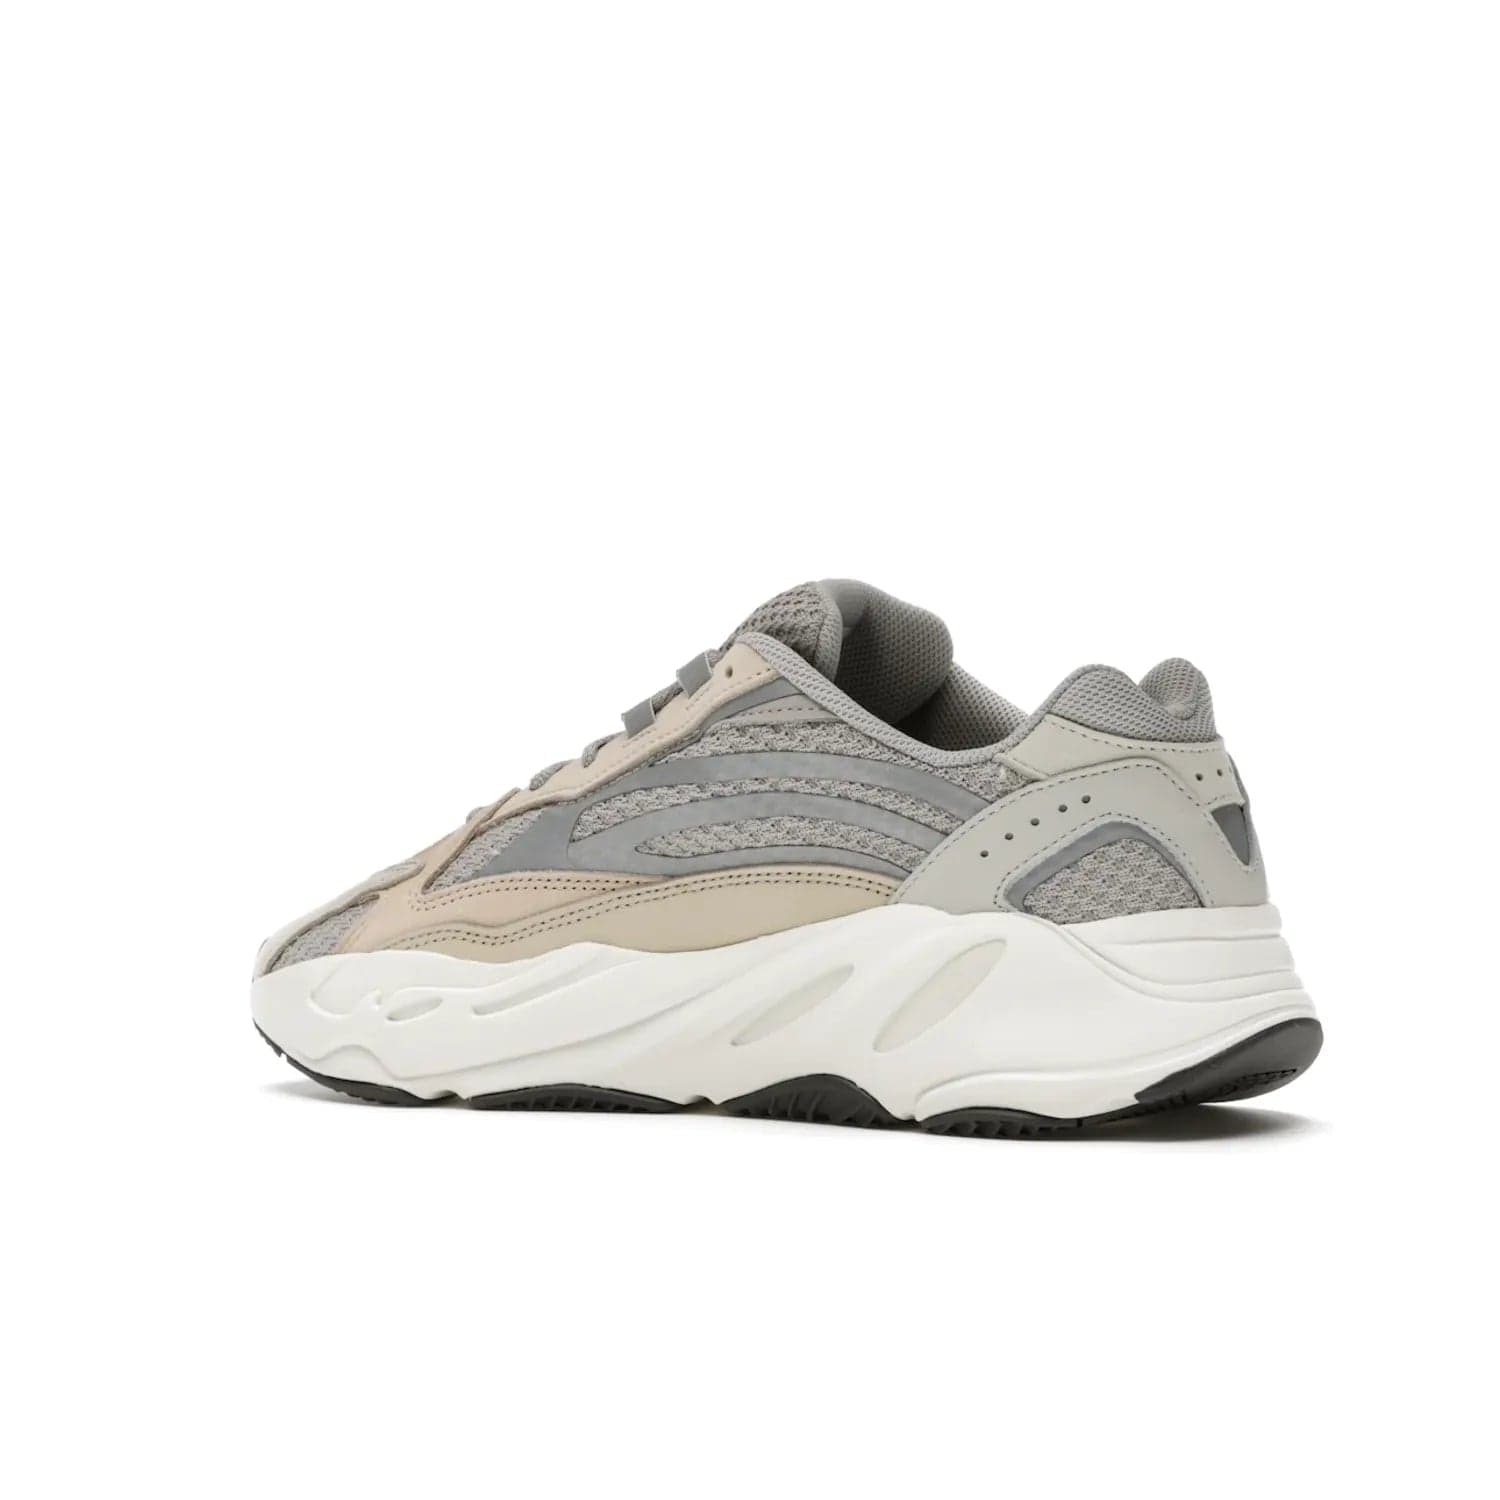 adidas Yeezy Boost 700 V2 Cream - Image 22 - Only at www.BallersClubKickz.com - Add style and luxury to your wardrobe with the adidas Yeezy 700 V2 Cream. Featuring a unique reflective upper, leather overlays, mesh underlays and the signature BOOST midsole, this silhouette is perfect for any stylish wardrobe.